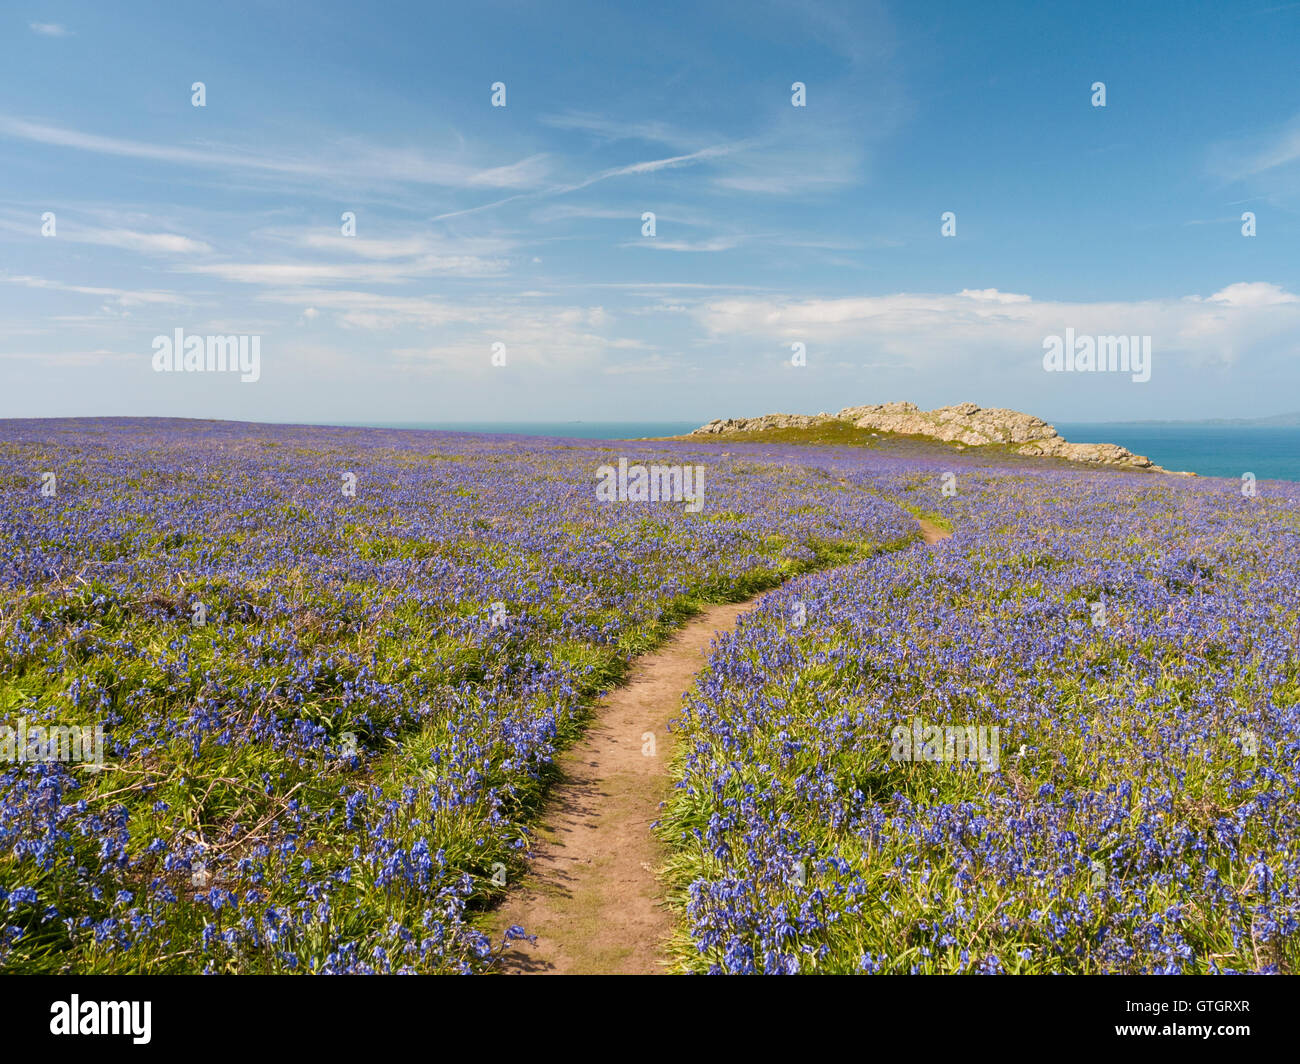 Native Bluebells (Hyacinthoides non-scripta) on the island of Skomer in the Pembrokeshire Coast National Park, Wales Stock Photo